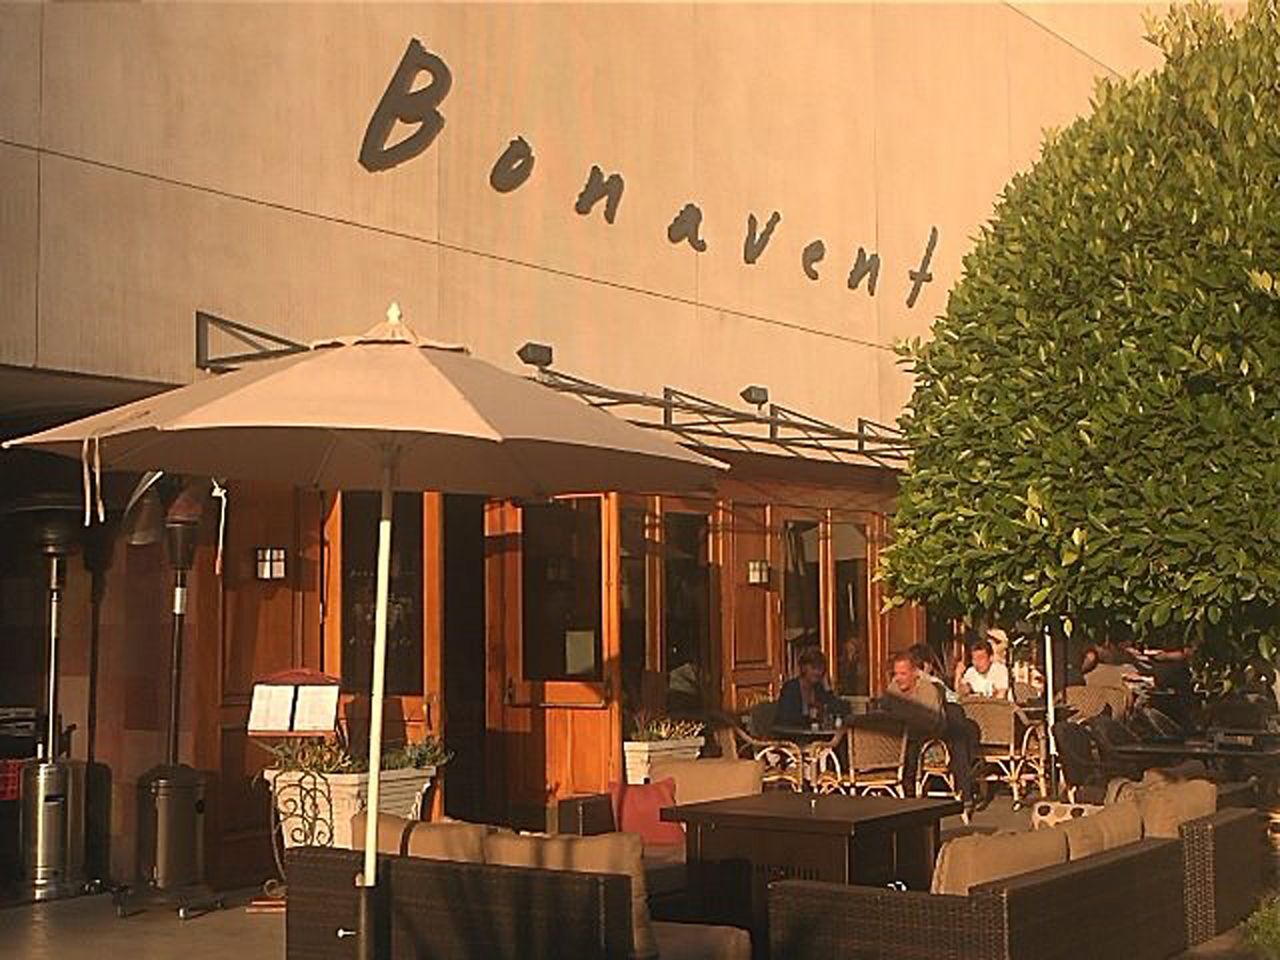 In 1998, the Bonaventure Hotel crane-lifted a 10-barrel brewery onto the property and turned its fourth-floor poolside restaurant into downtown LA's only brewpub.